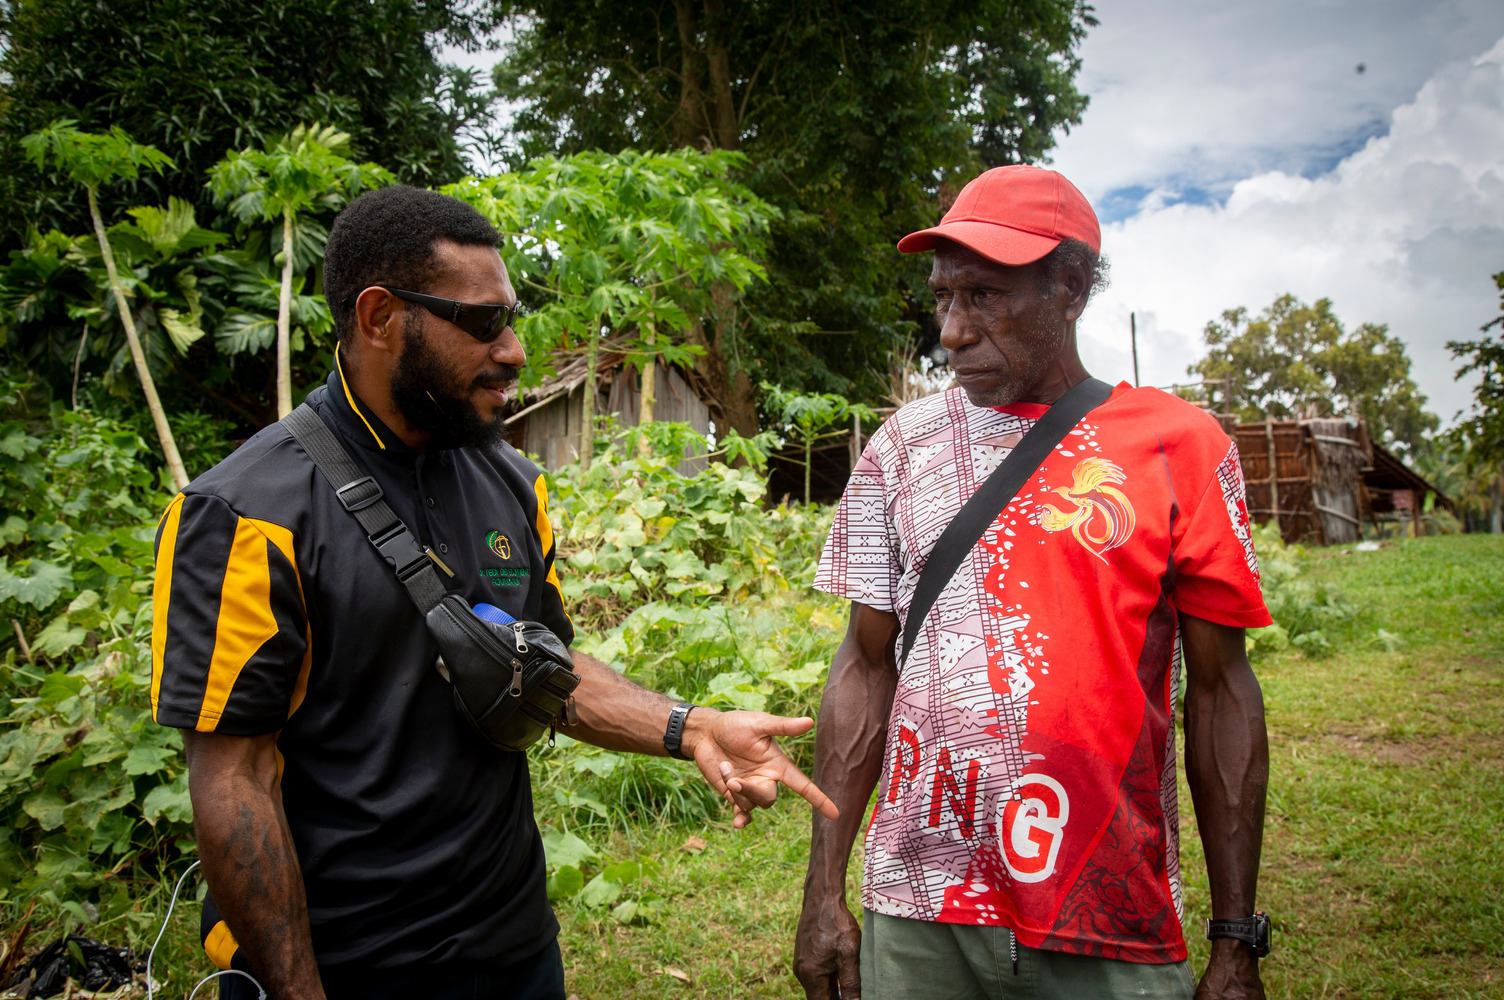 Robin Alphonse (right) from Kwem village in the Middle Fly District trades fisheries products at the PNG-Indonesia border. Trading at the border is not formalised, and means fishers have no control over pricing. Mr Alphonse says sometimes they earn money, sometimes they make a loss.